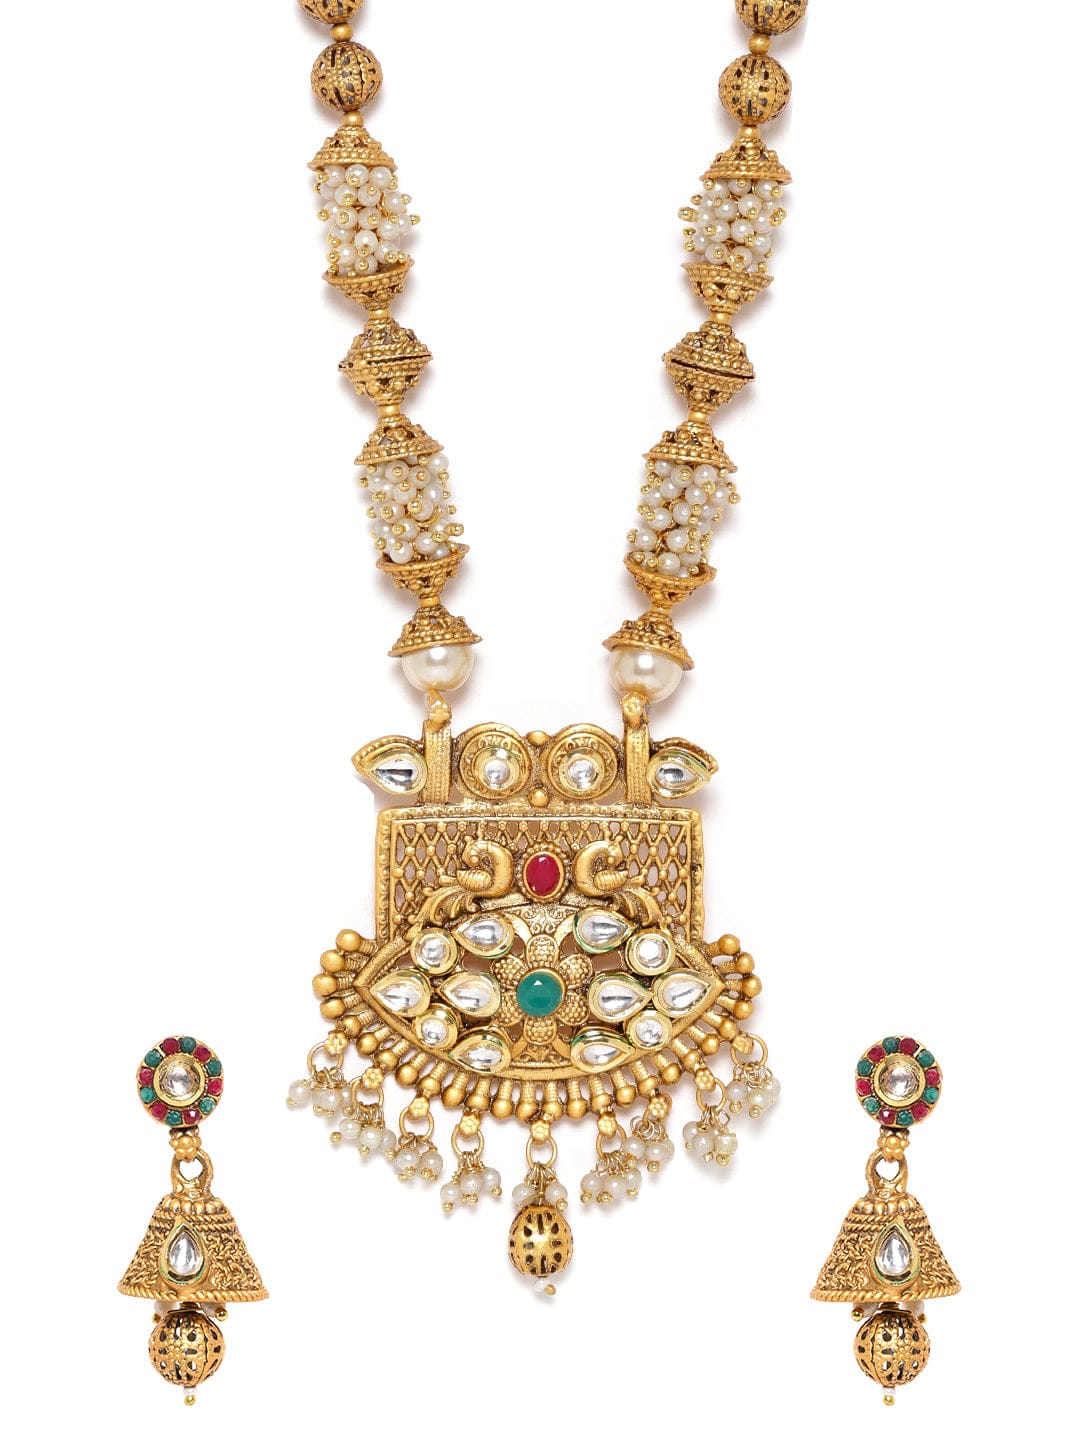 Rubans Gold-Toned Necklace Set with White and Gold Beads Jewellery Sets